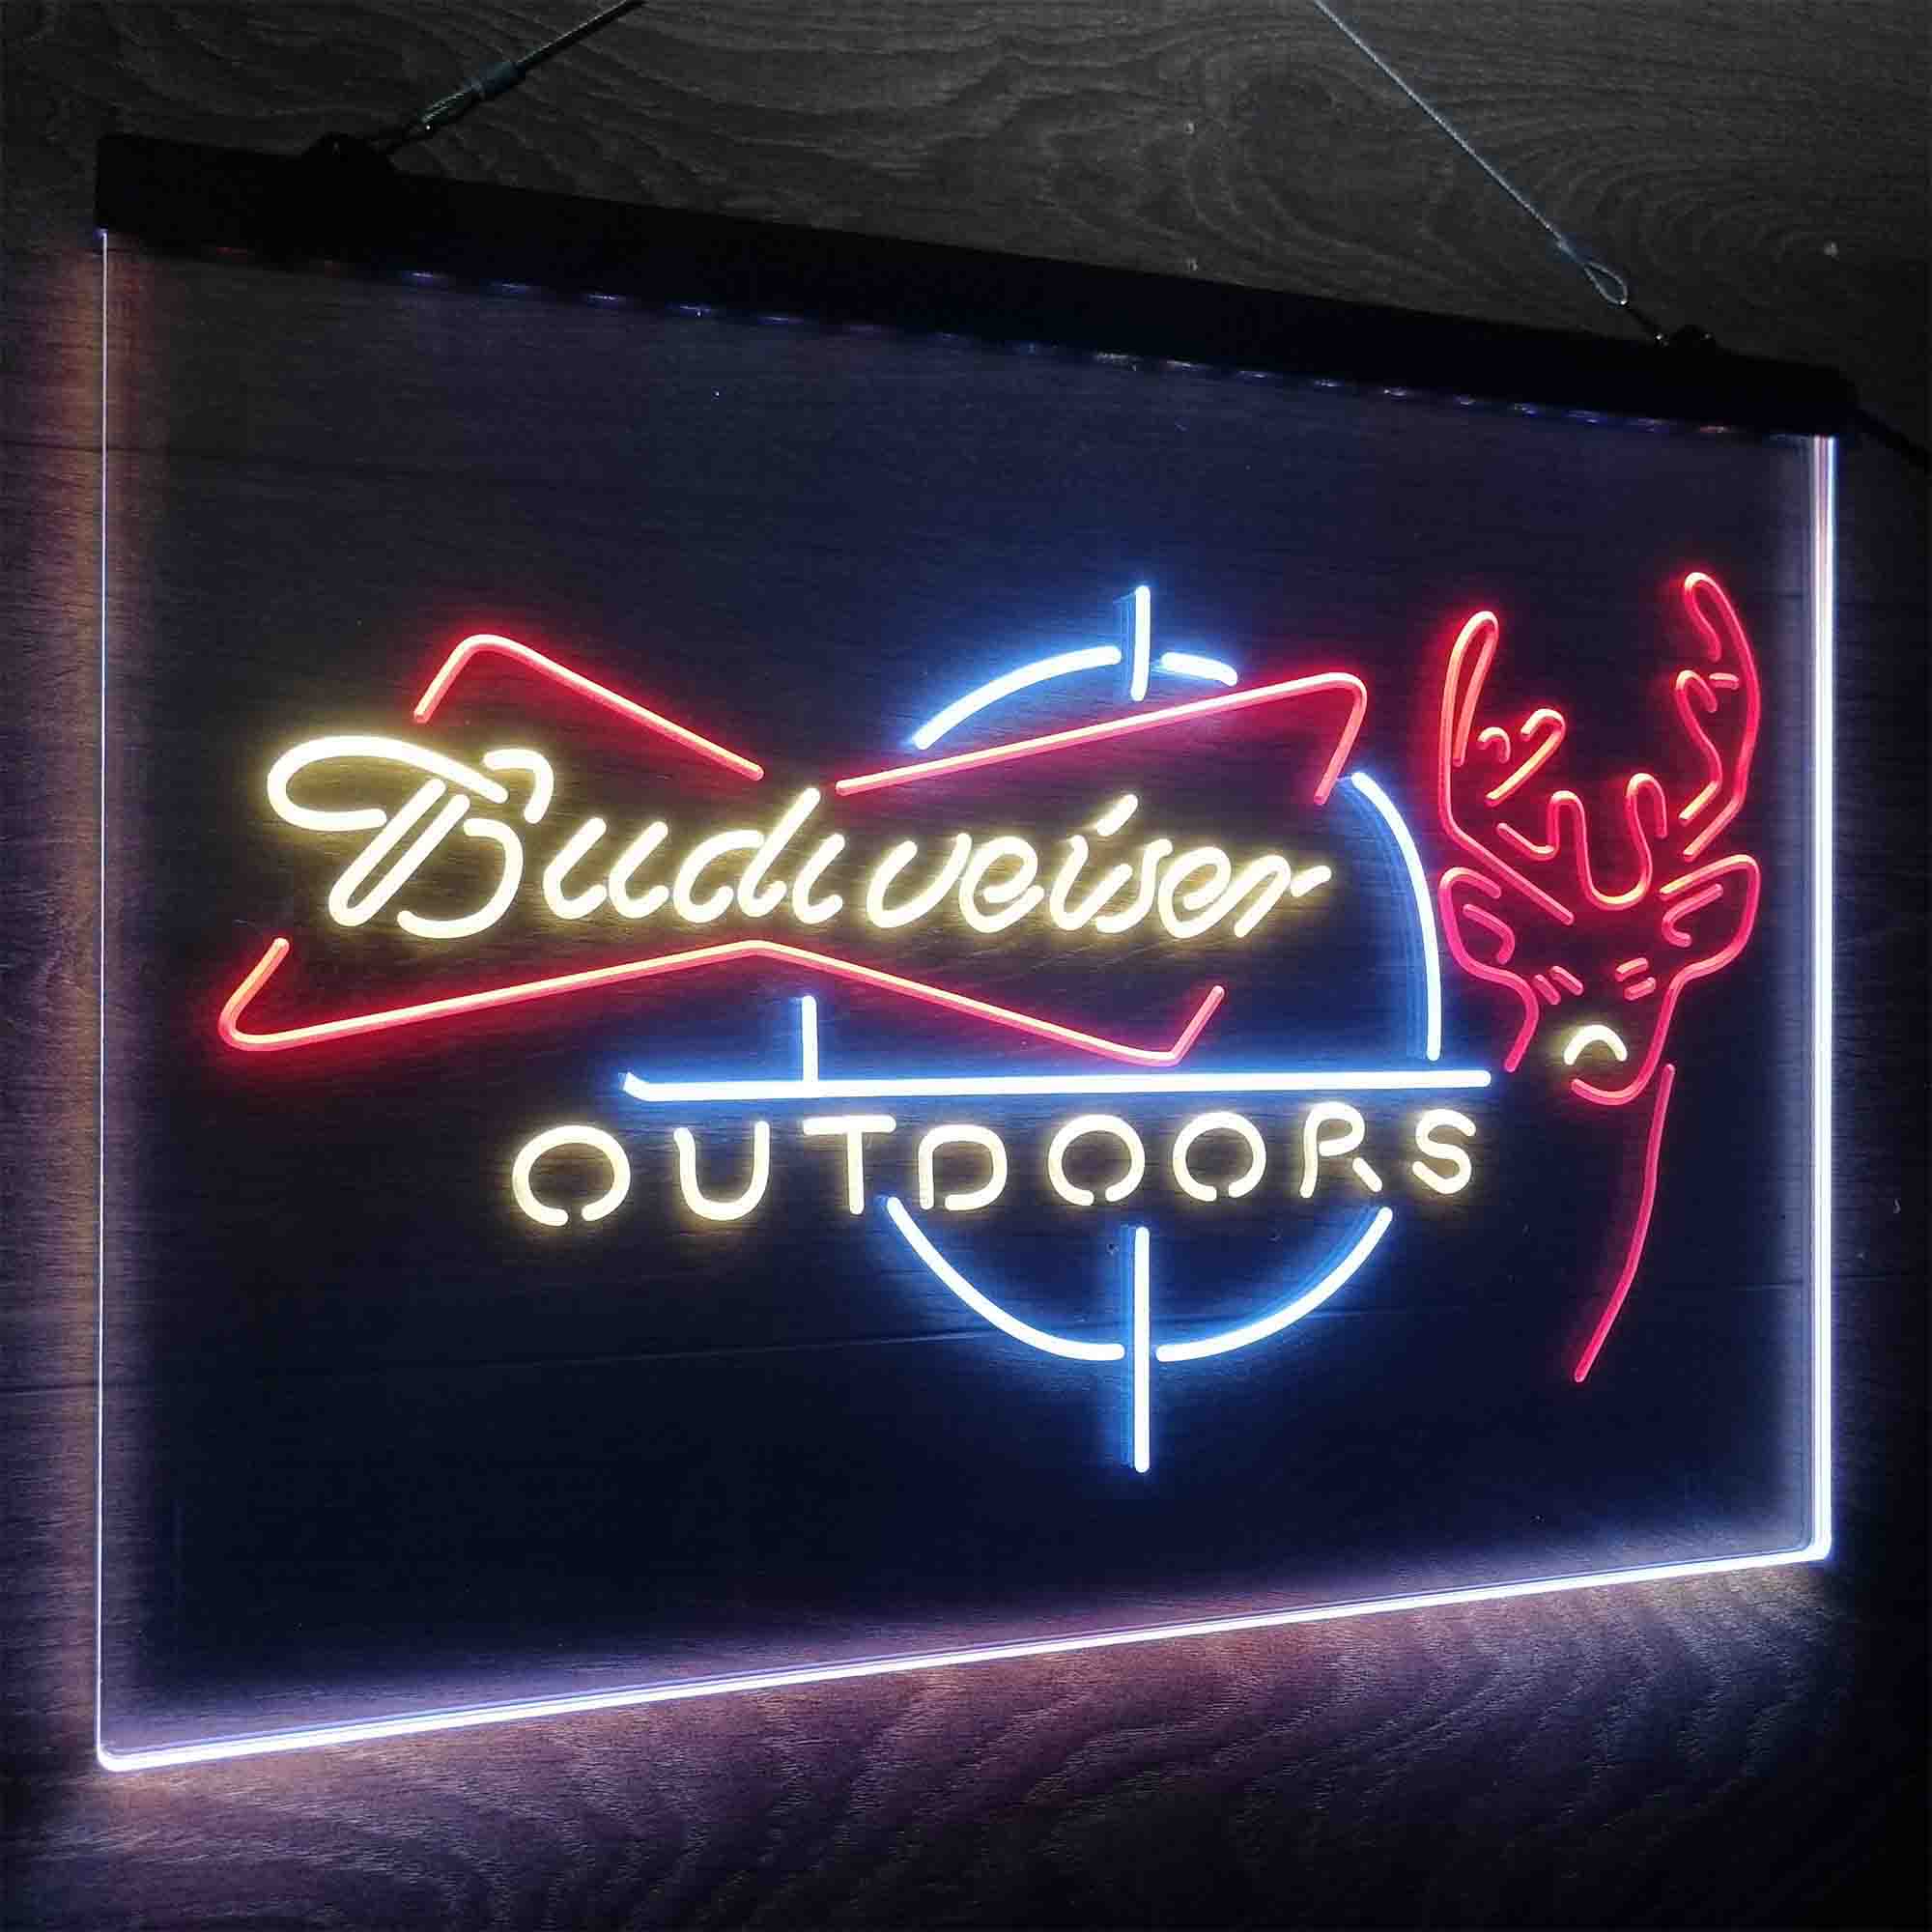 Budweiser Outdoor Hunting Cabin Deer Decor Neon LED Sign 3 Colors